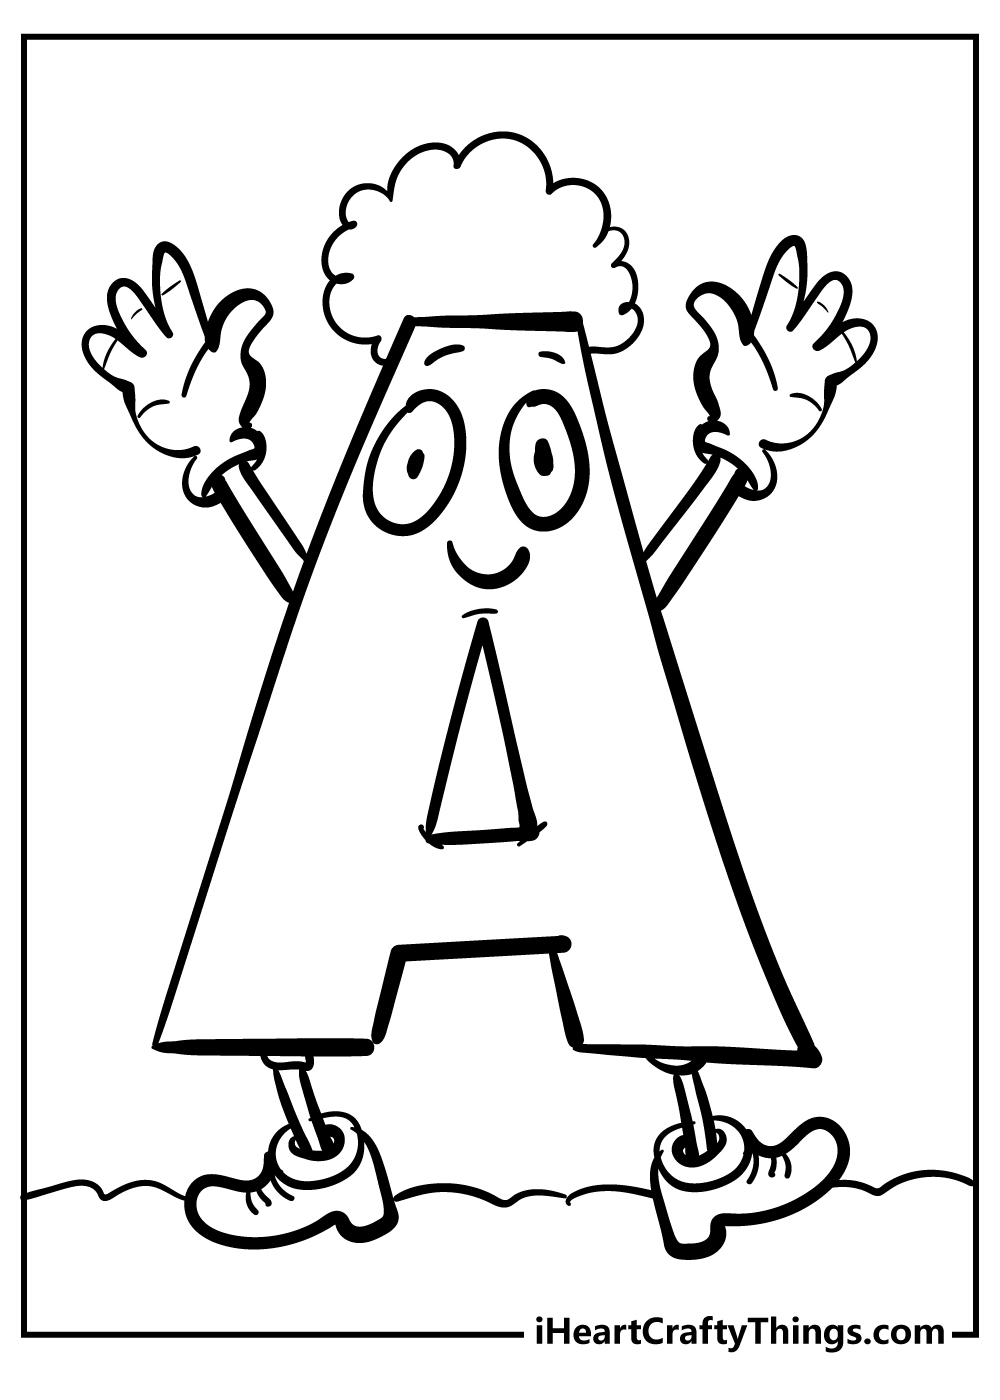 Letter A coloring pages free printable